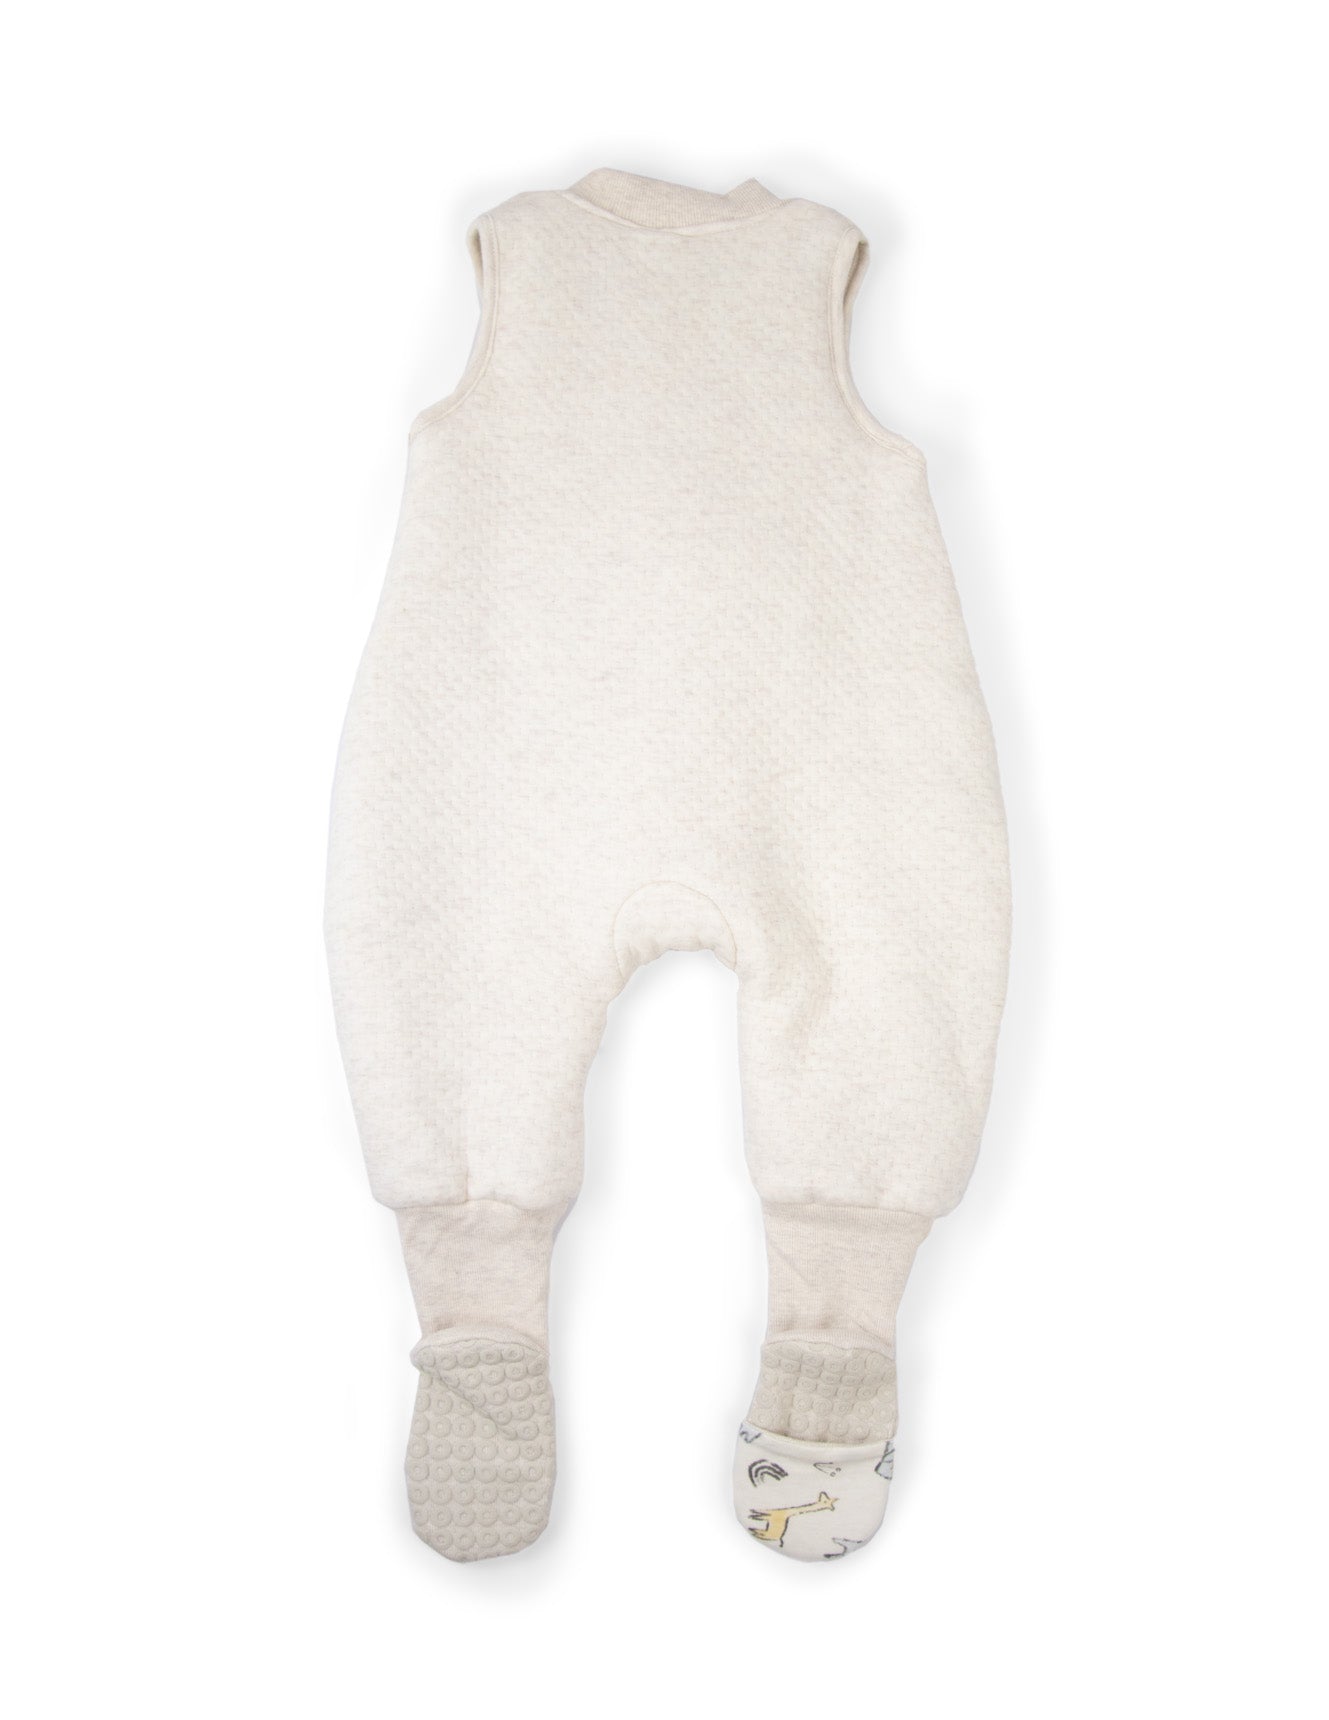 warmies cotton sleeveless with legs 2.5 TOG - oatmeal/rumble jungle